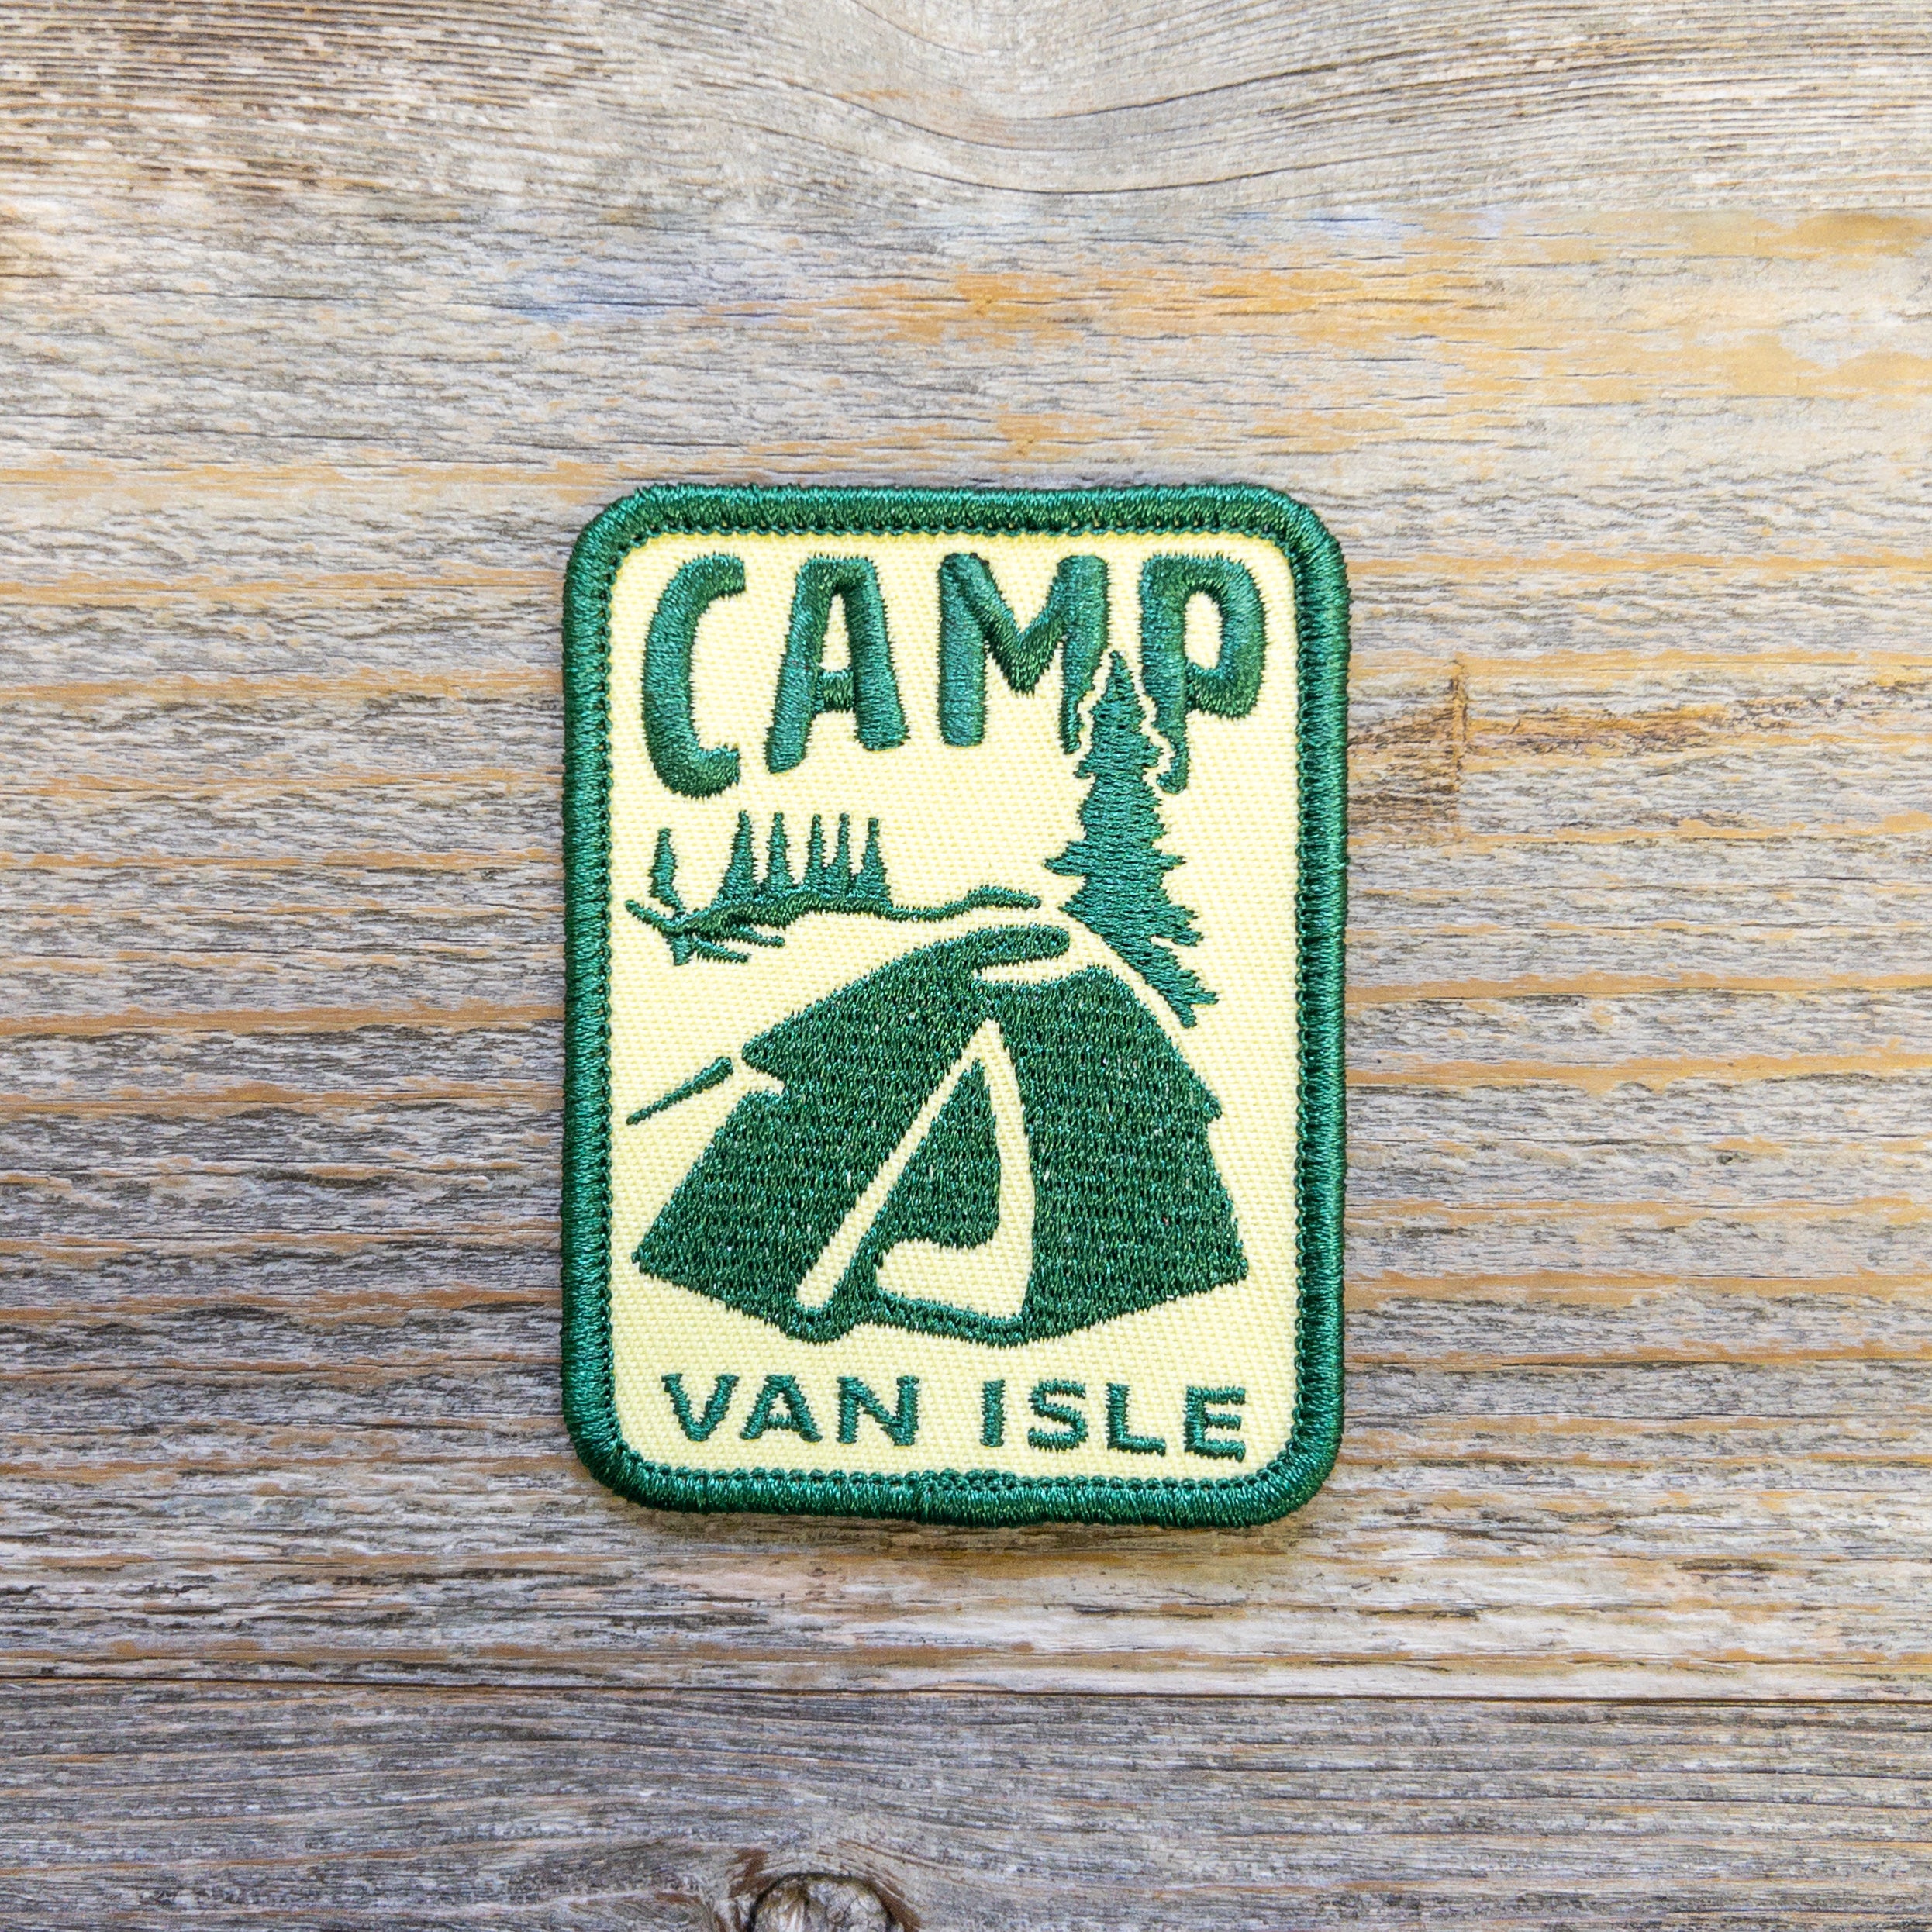 Bough & Antler "Camp" Patch